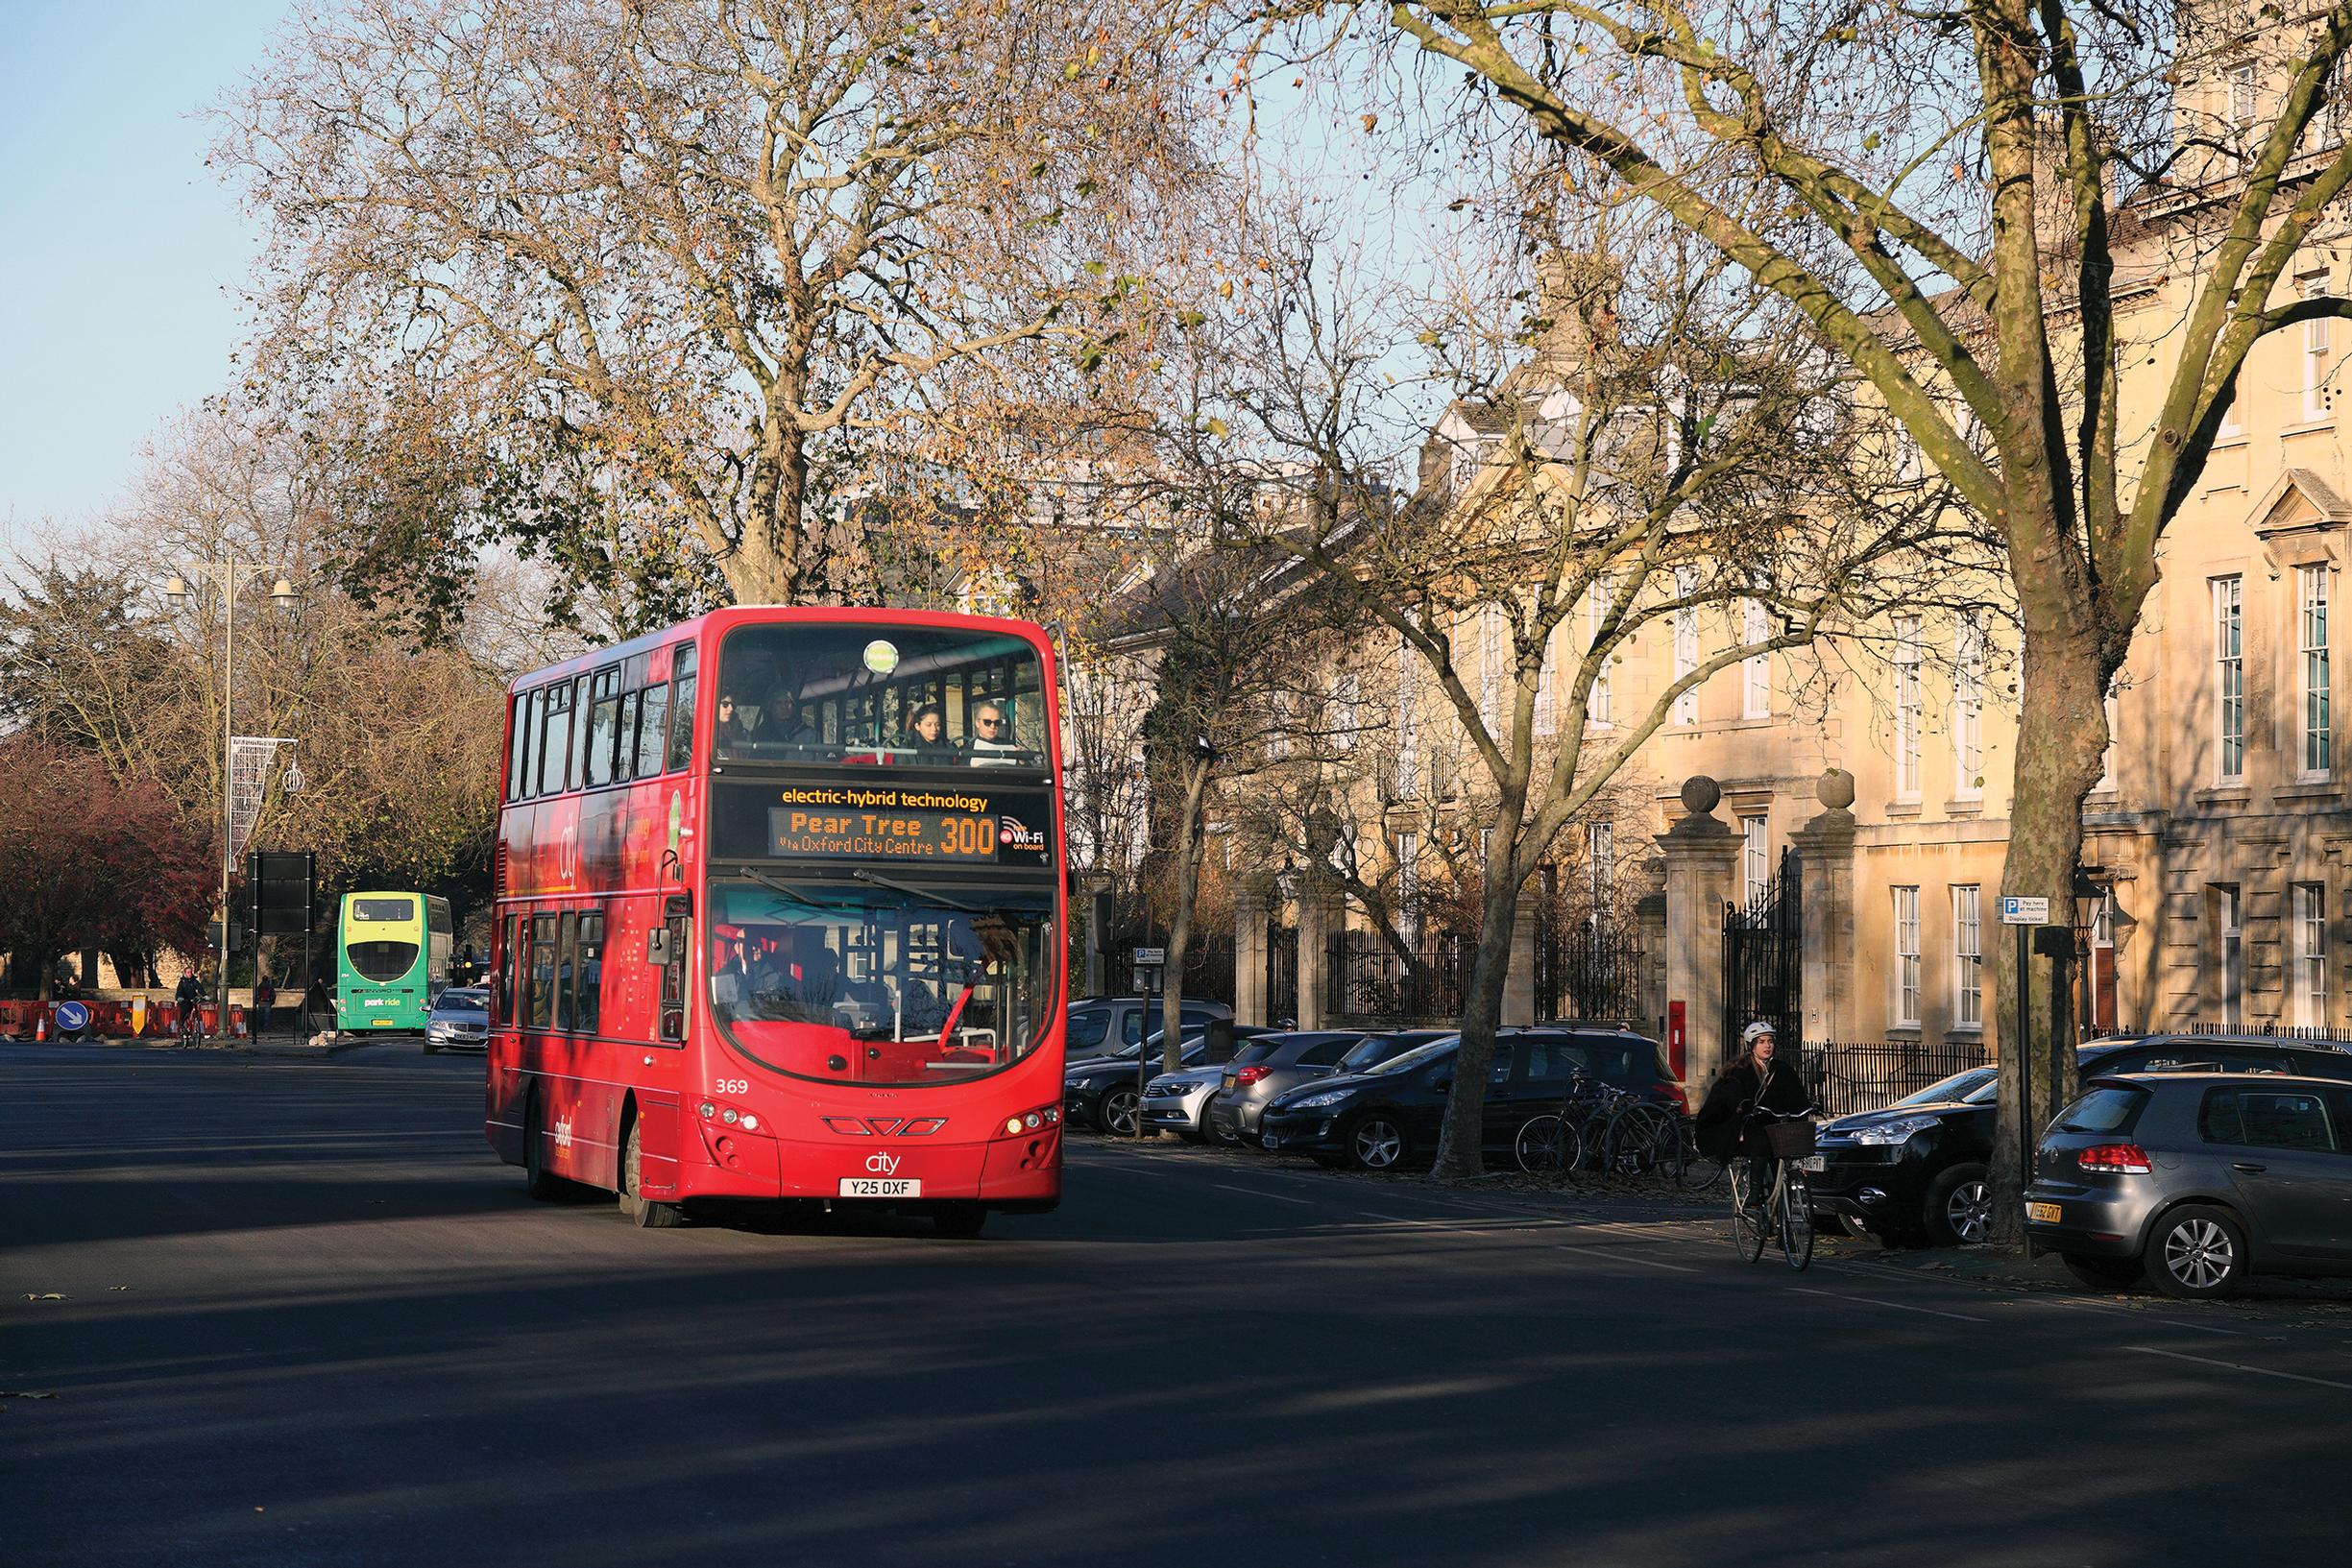 Buses form the backbone of Oxford’s public transport system. The council has plans for bus rapid transit routes, and new park-and-ride sites located some distance from the city